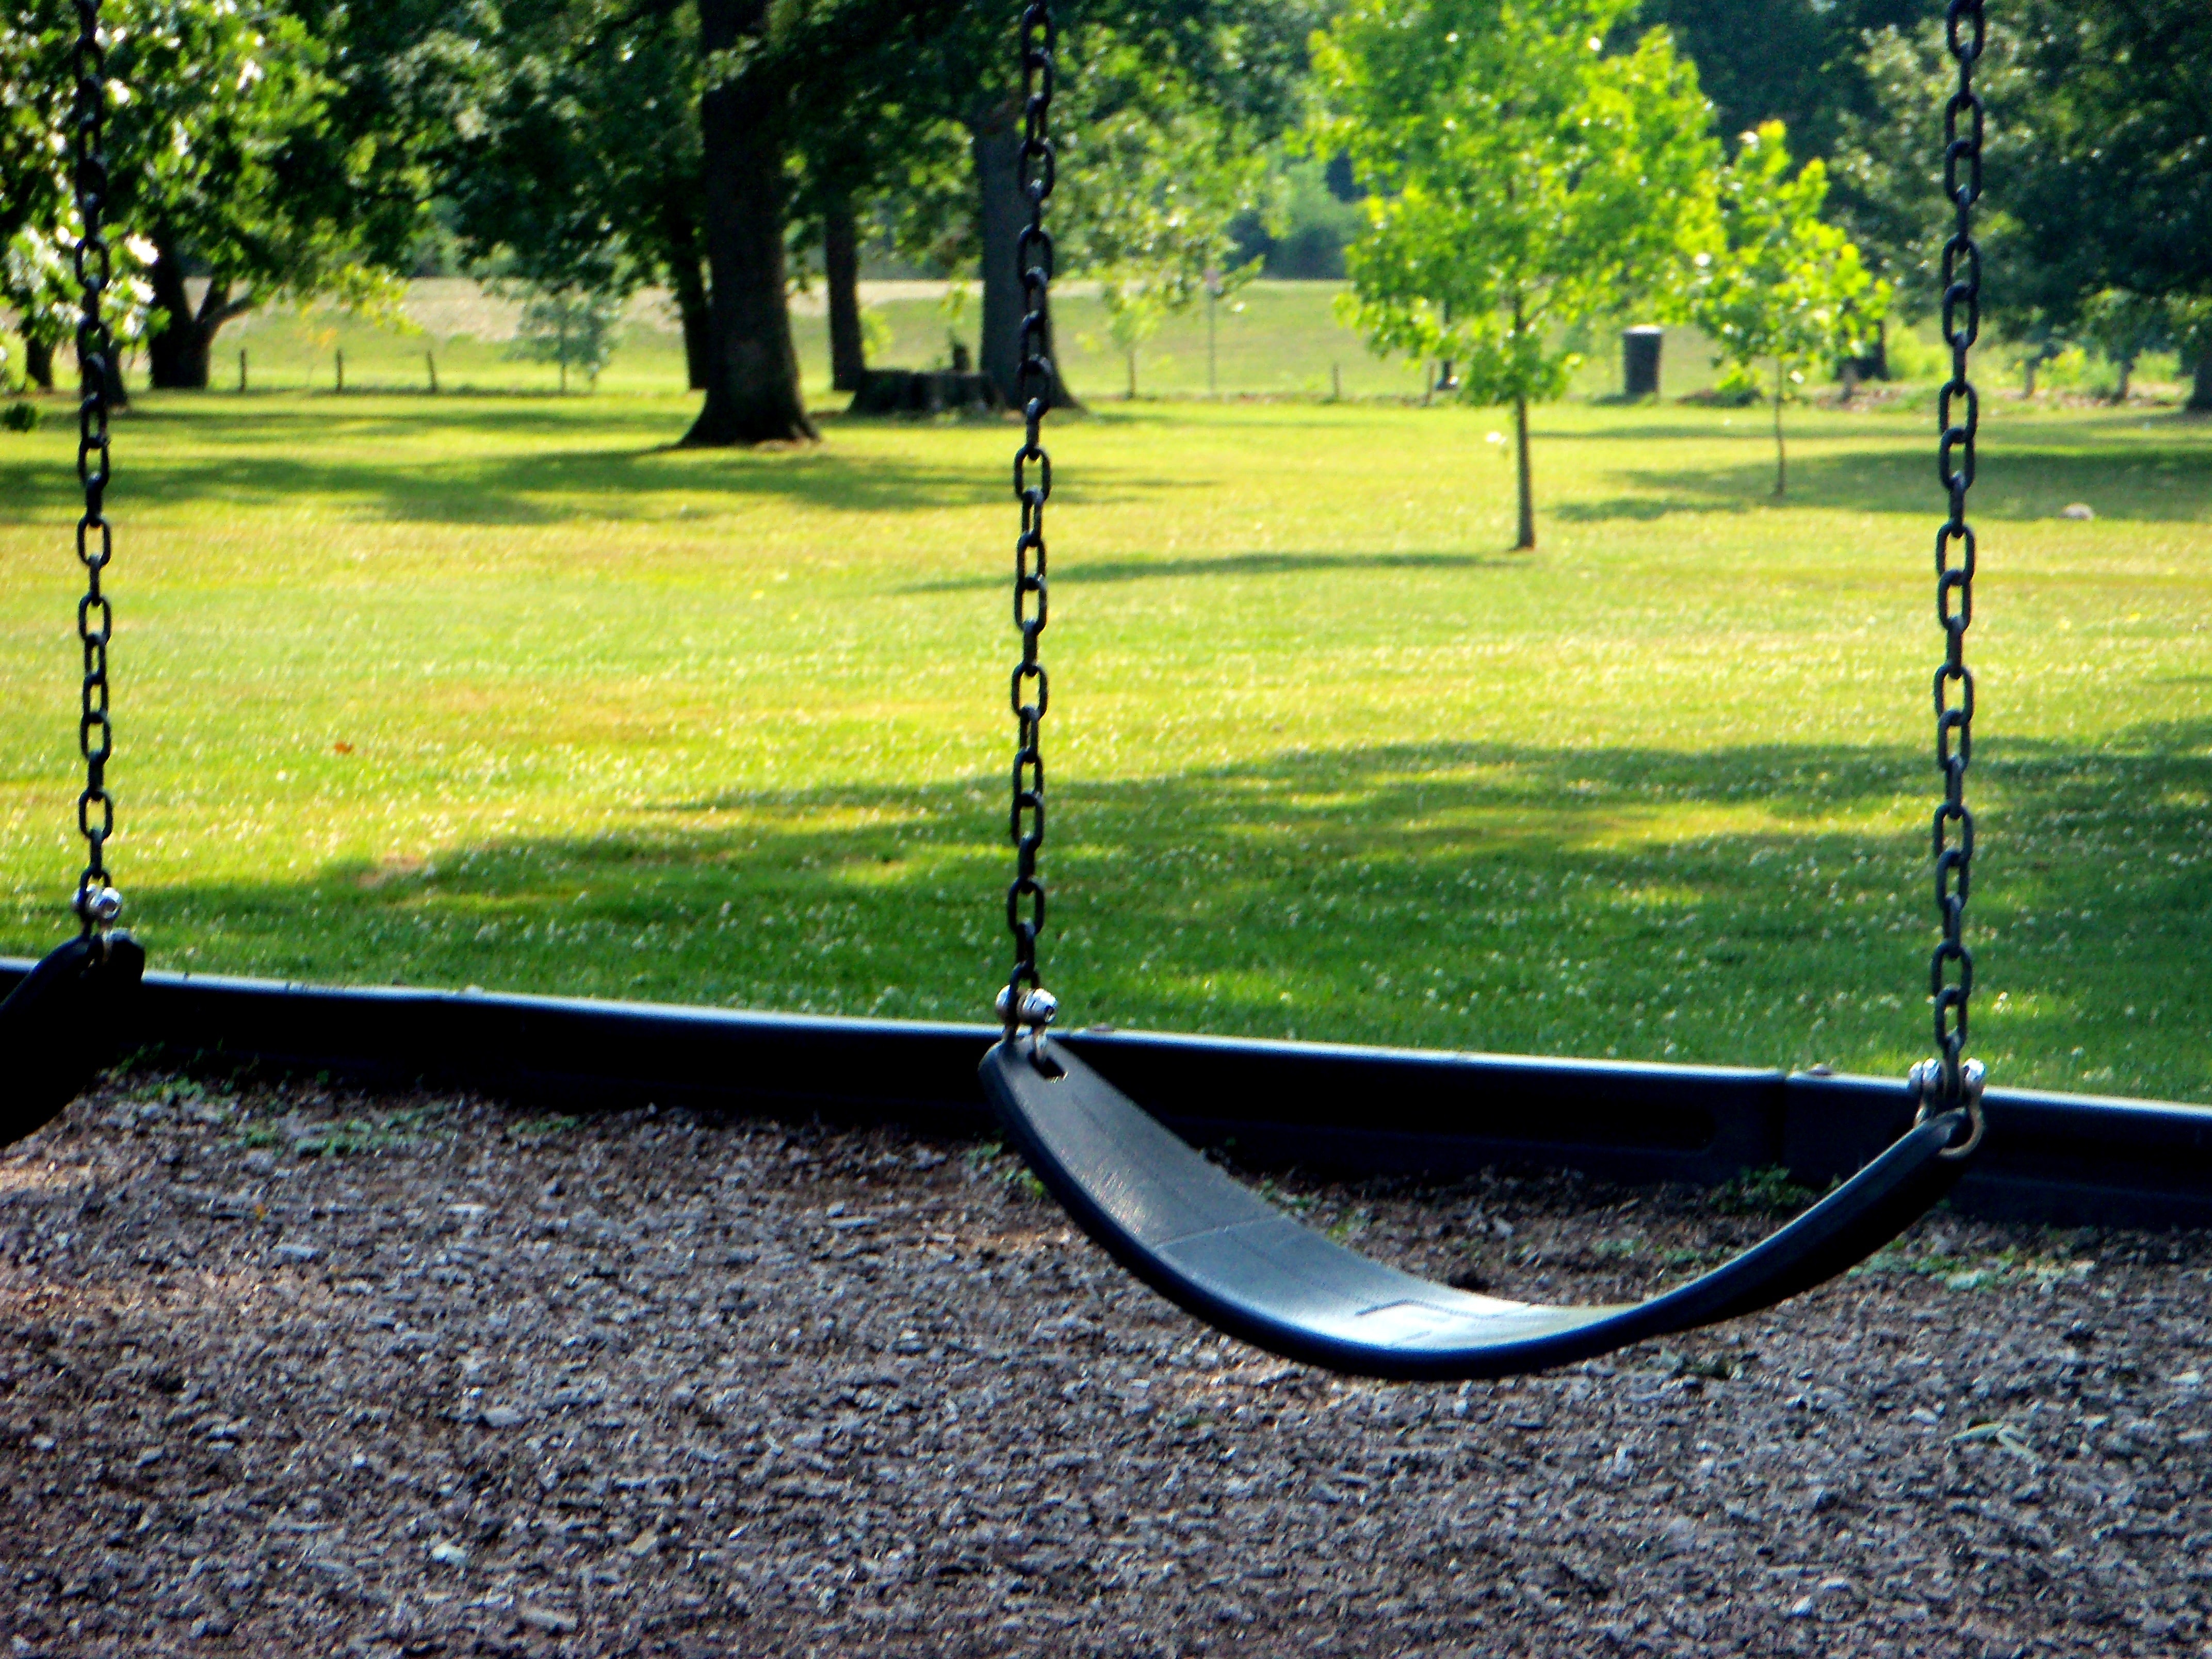 blue swing with no person sitting